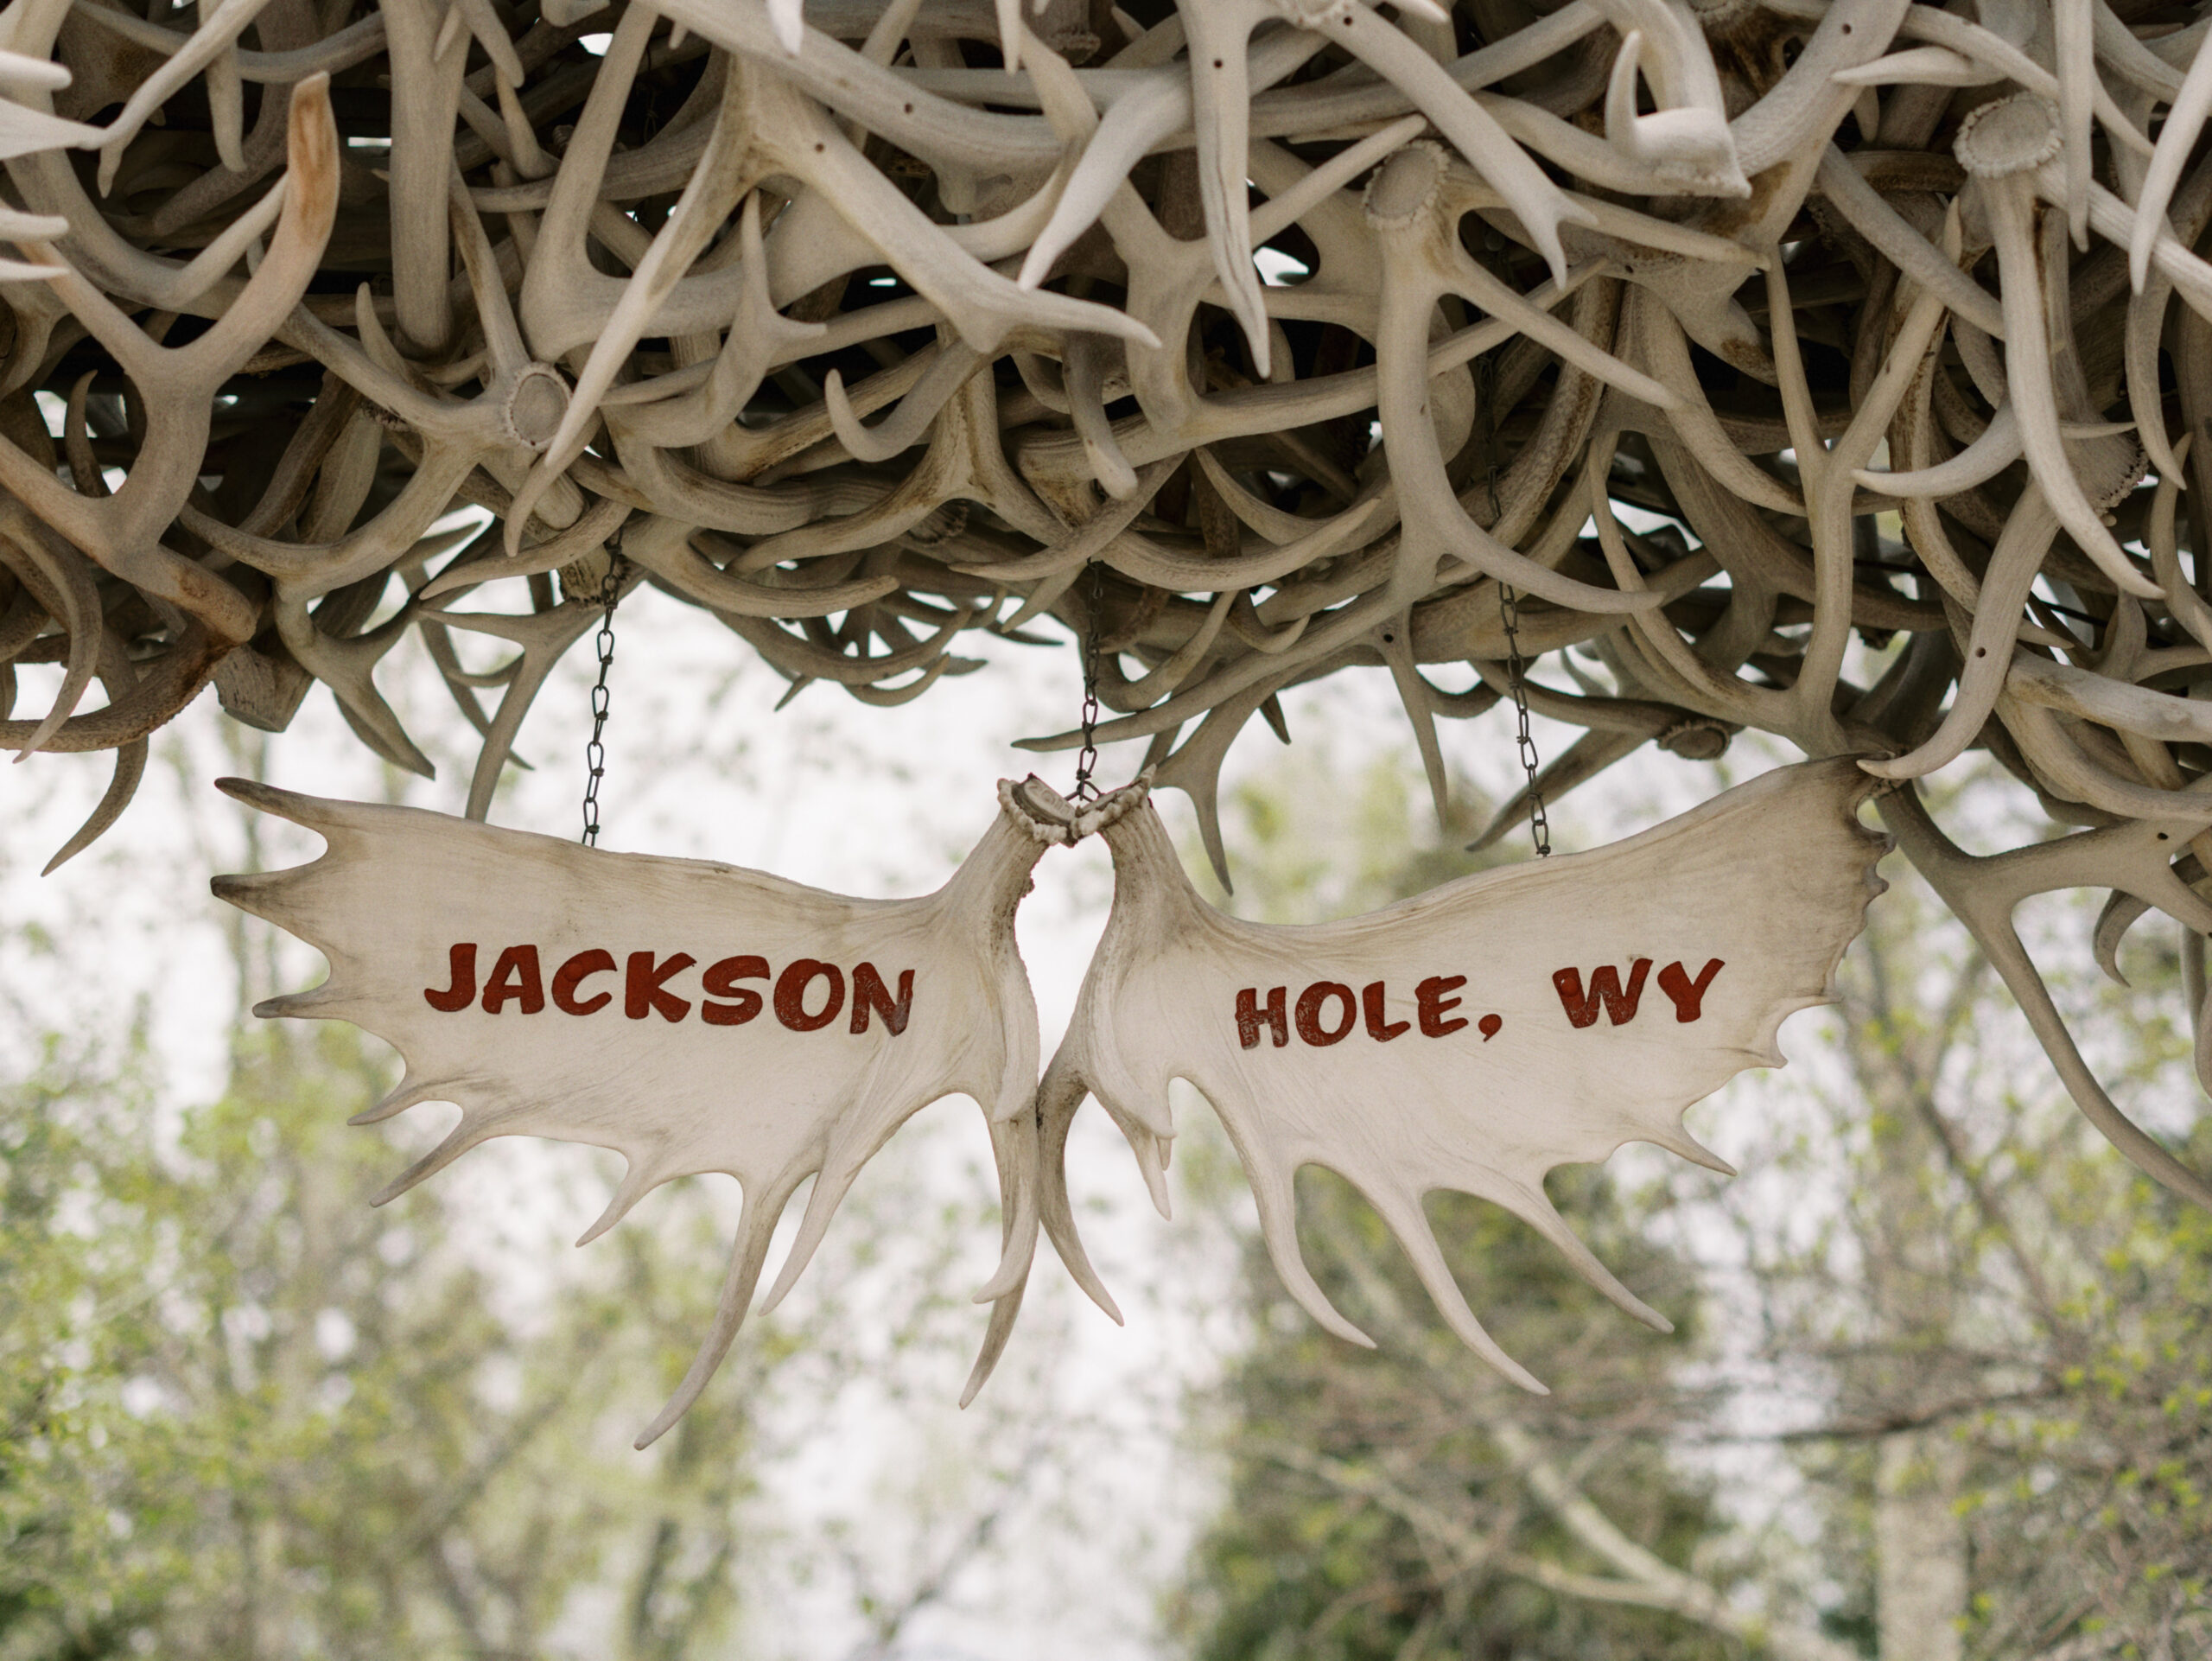 The captivating Antler Arches design in Jackson Hole impressively captures attention with its unique display.